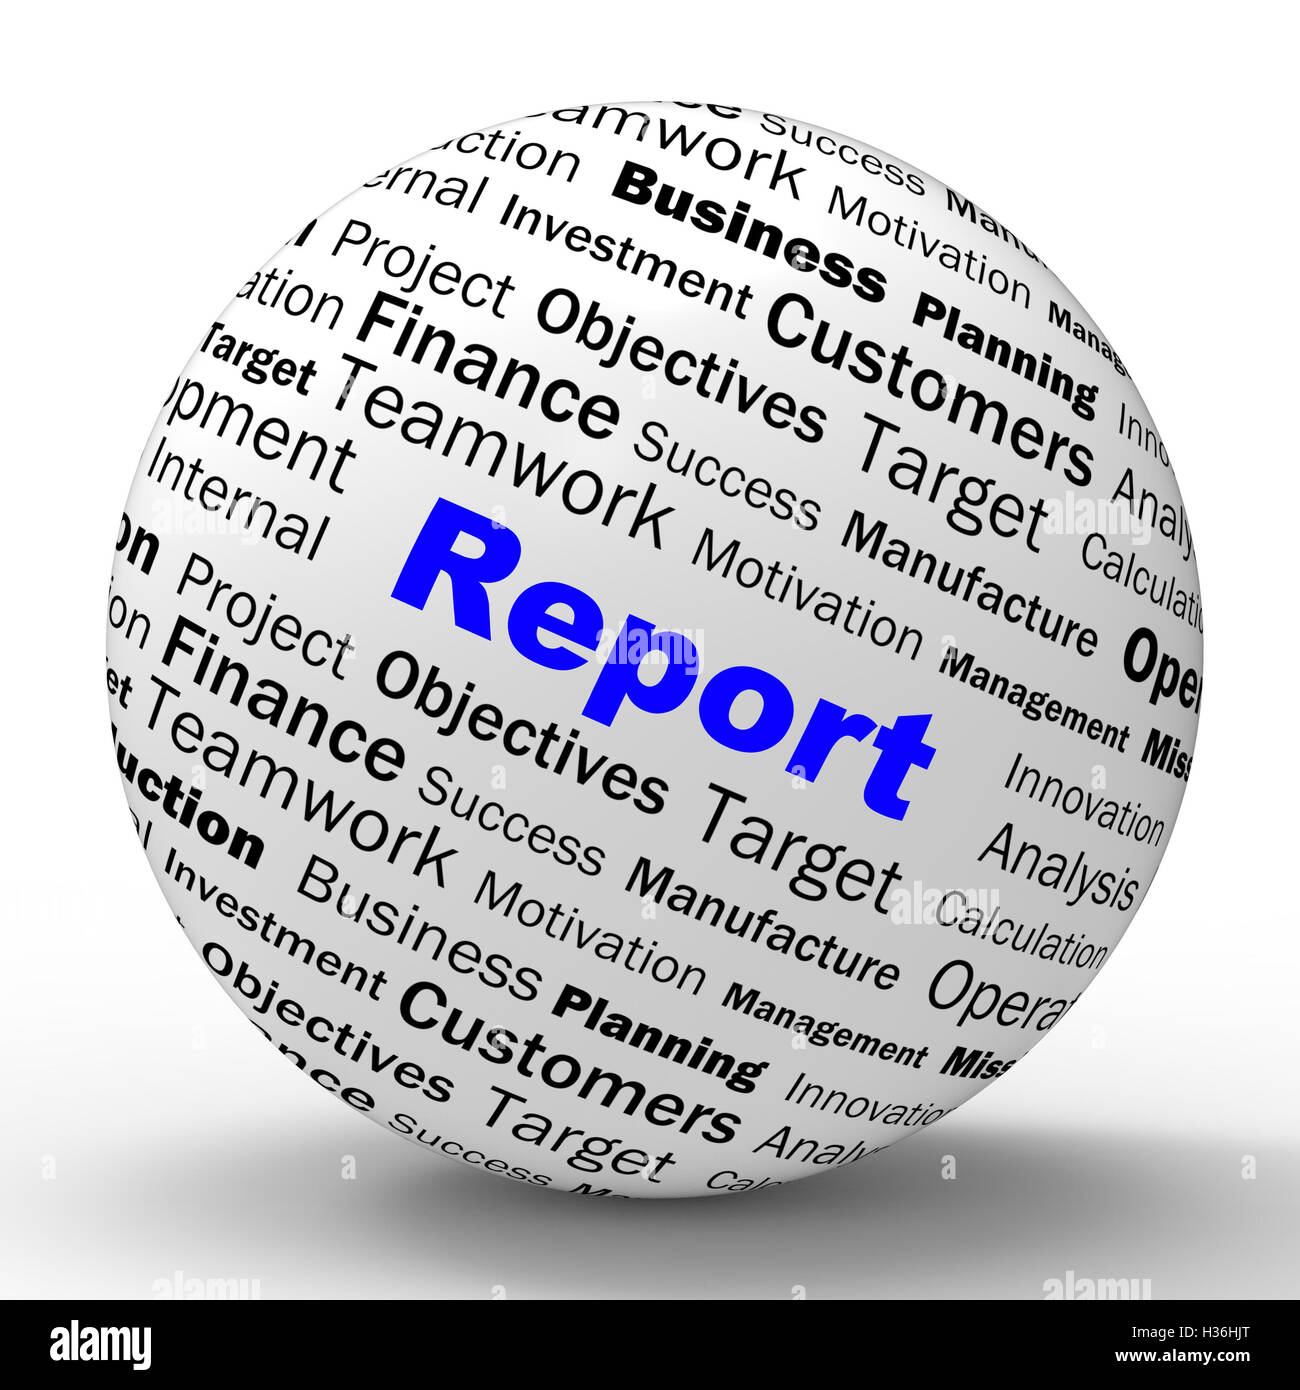 Report Sphere Definition Shows Progress Statistics And Financial Stock Photo